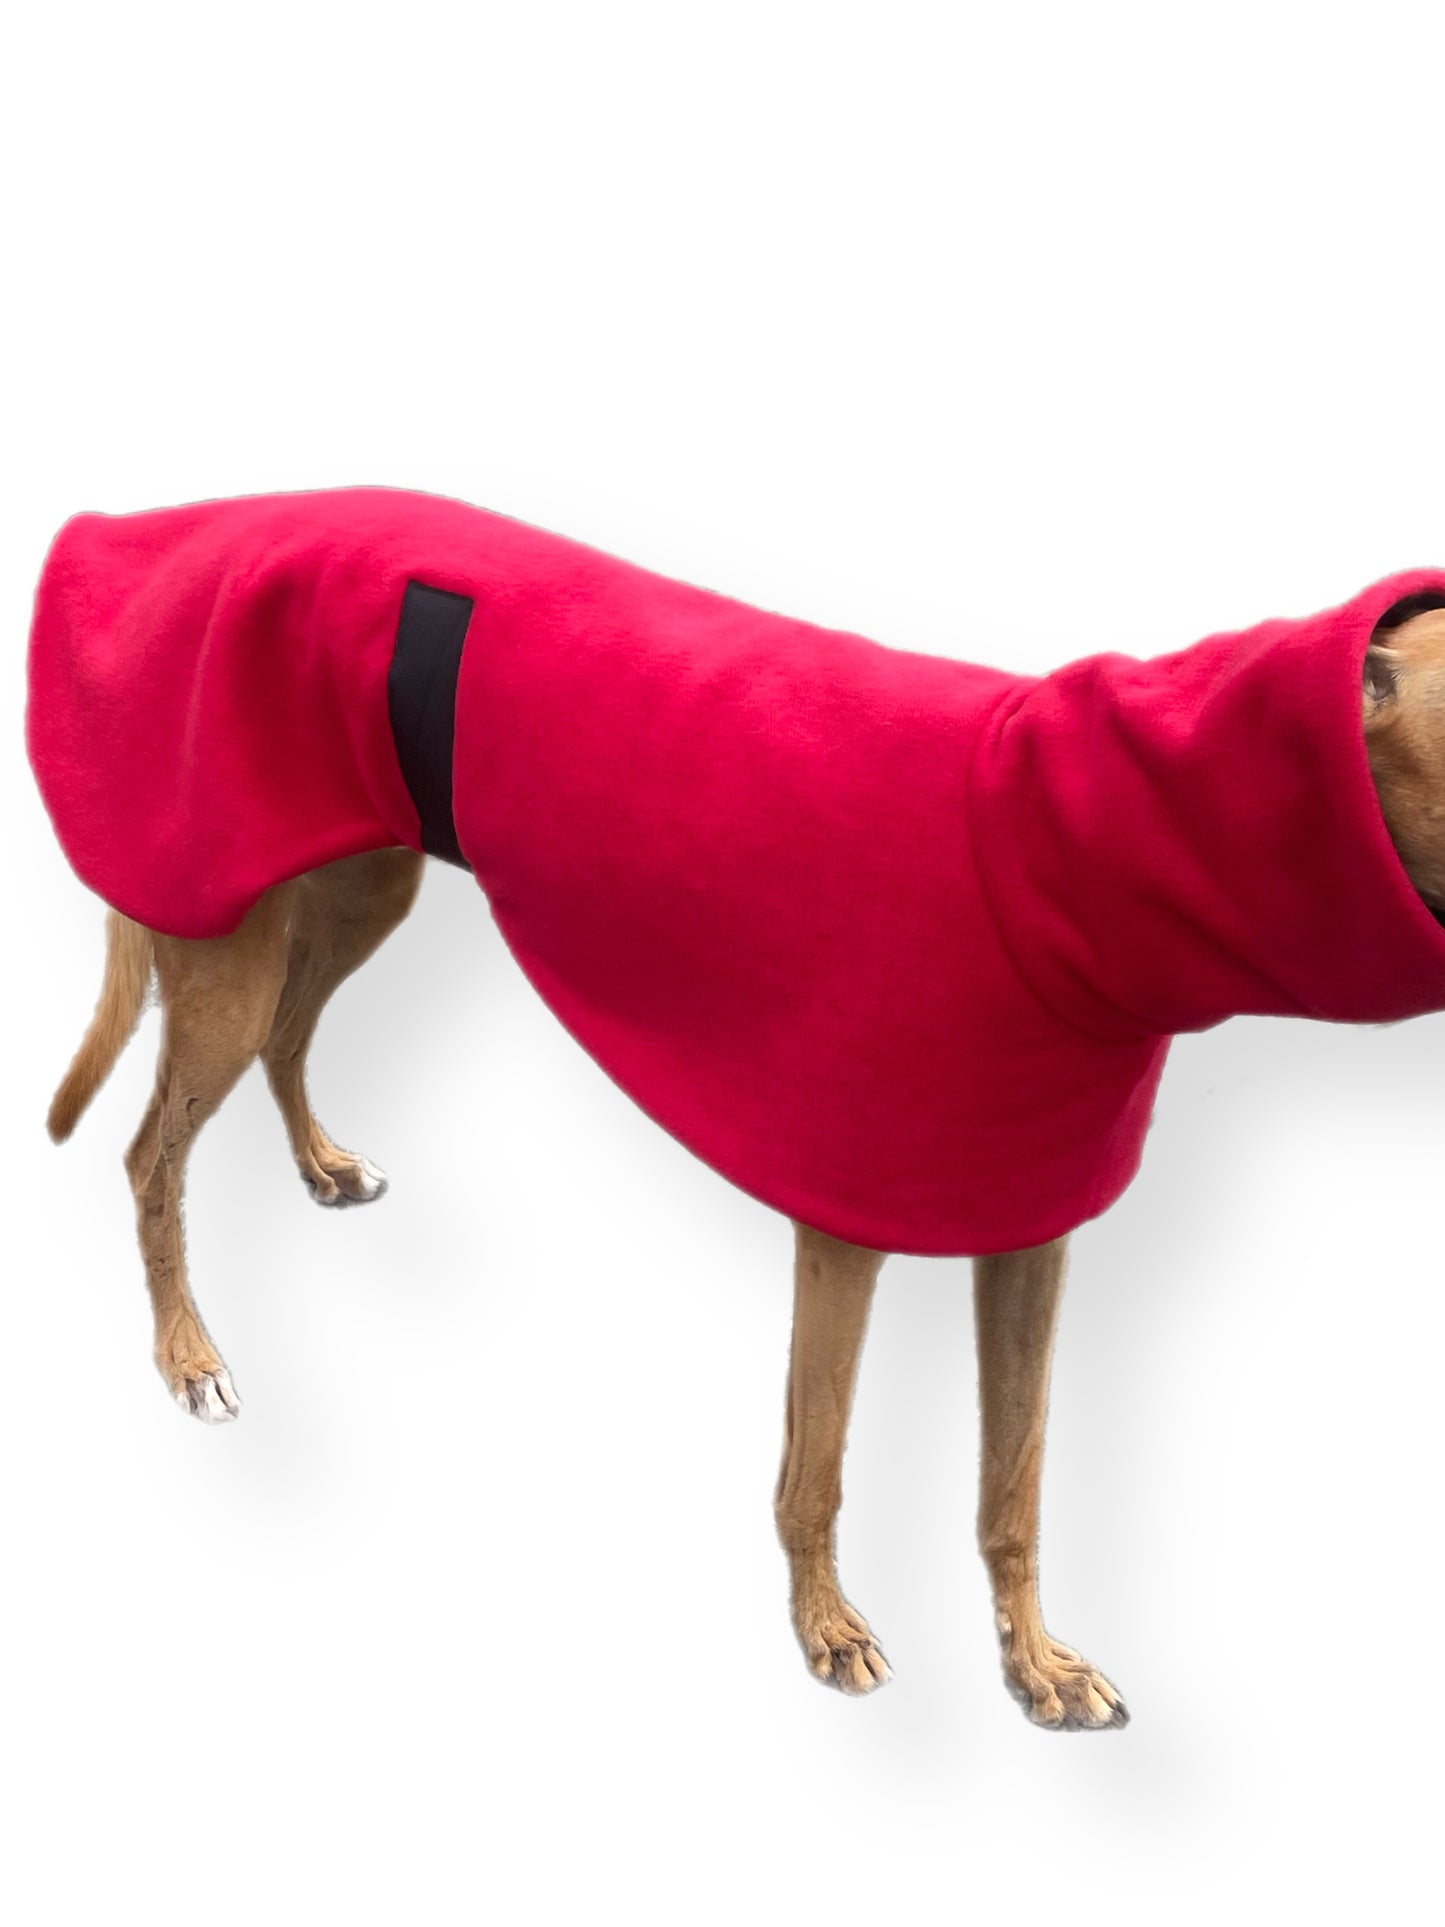 Greyhound deluxe style coat in luscious red washable extra thick double polar fleece